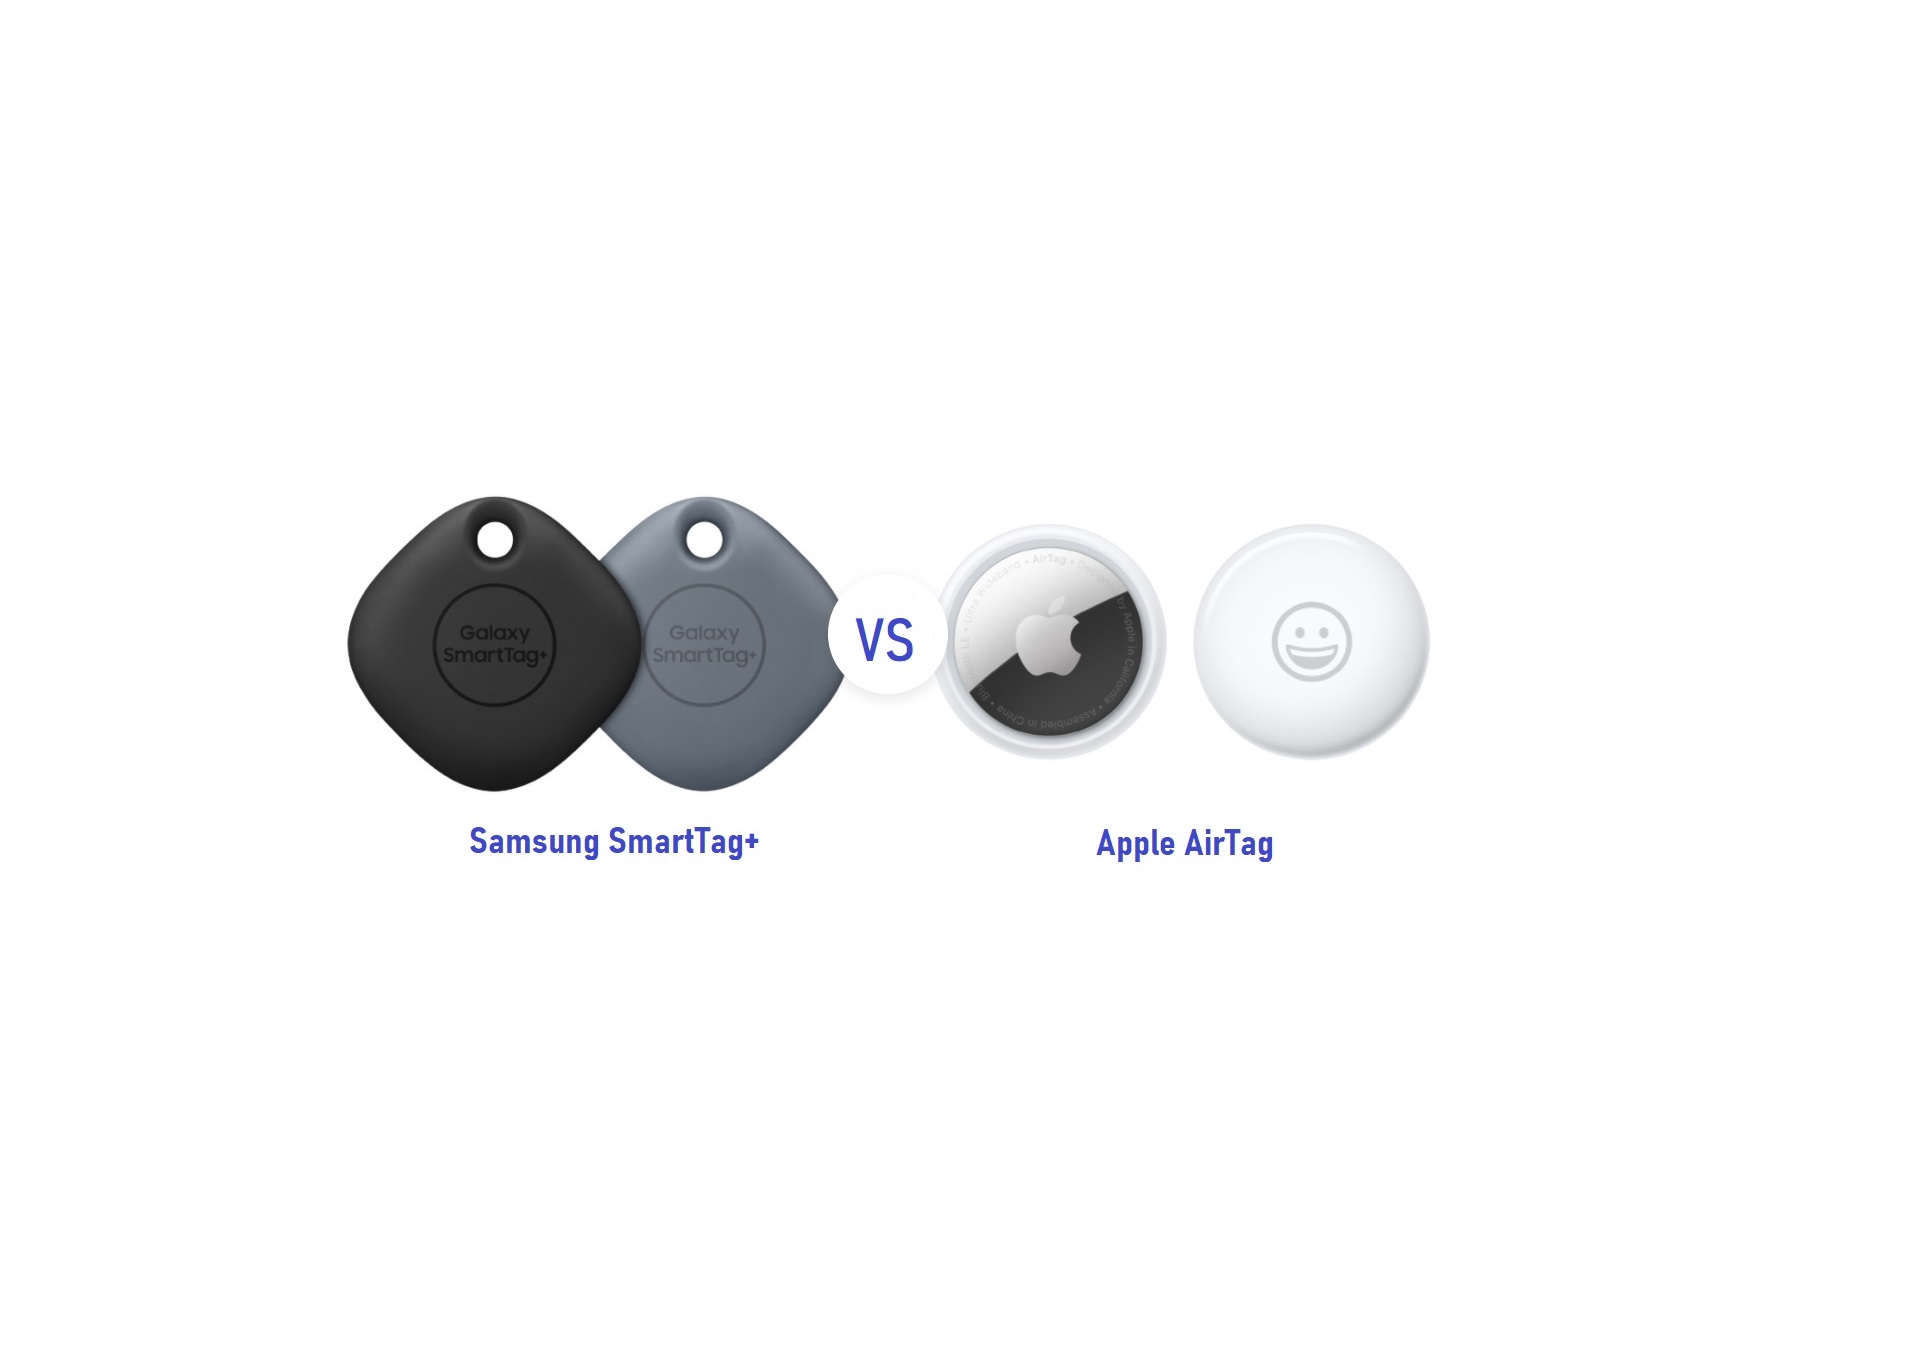 Samsung Galaxy SmartTag+ vs. Apple AirTag: Which does more with your phone?